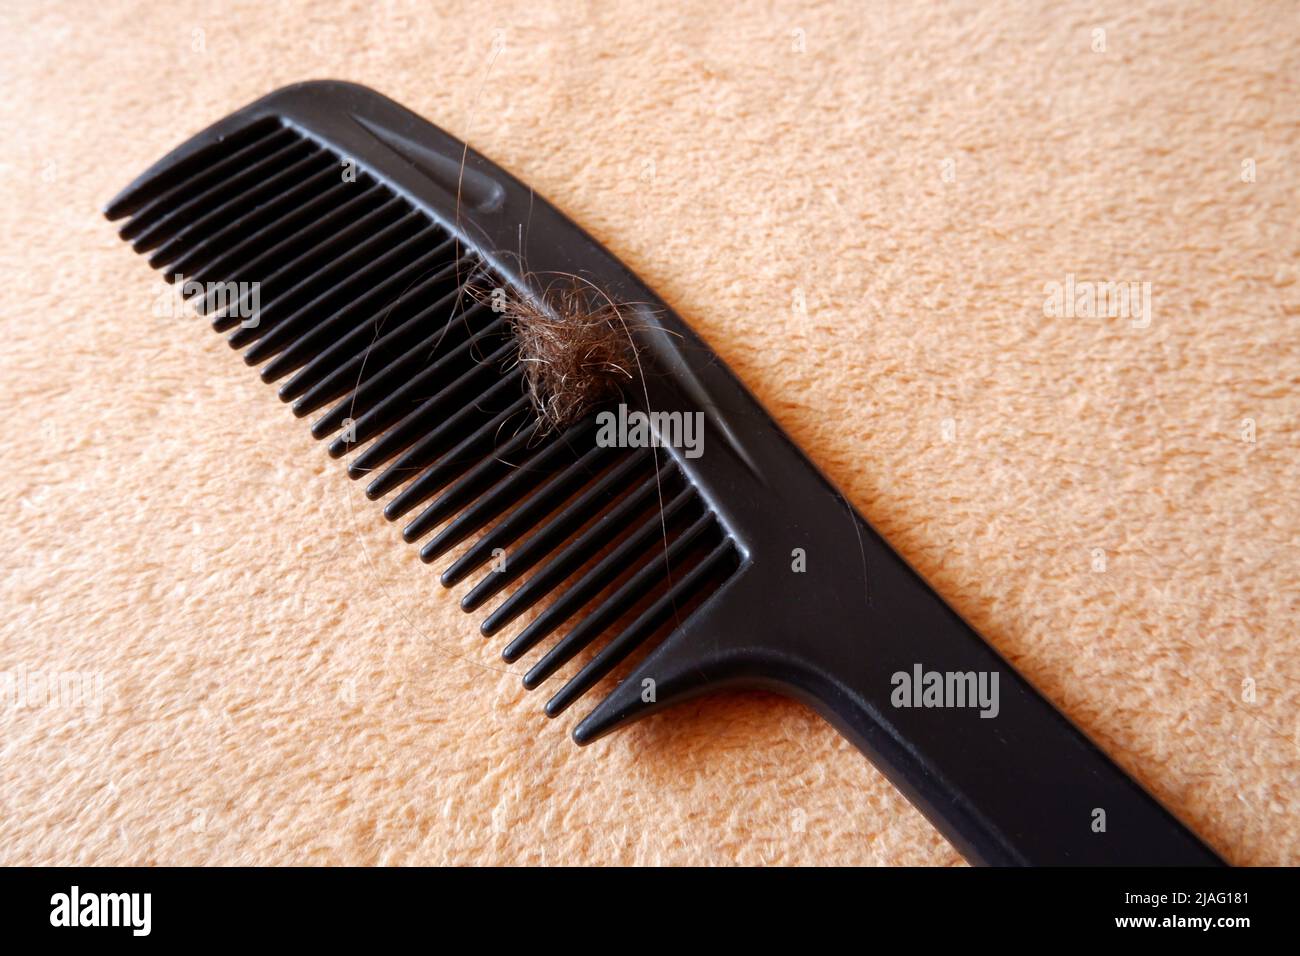 A comb with matted hair lies on a towel Stock Photo